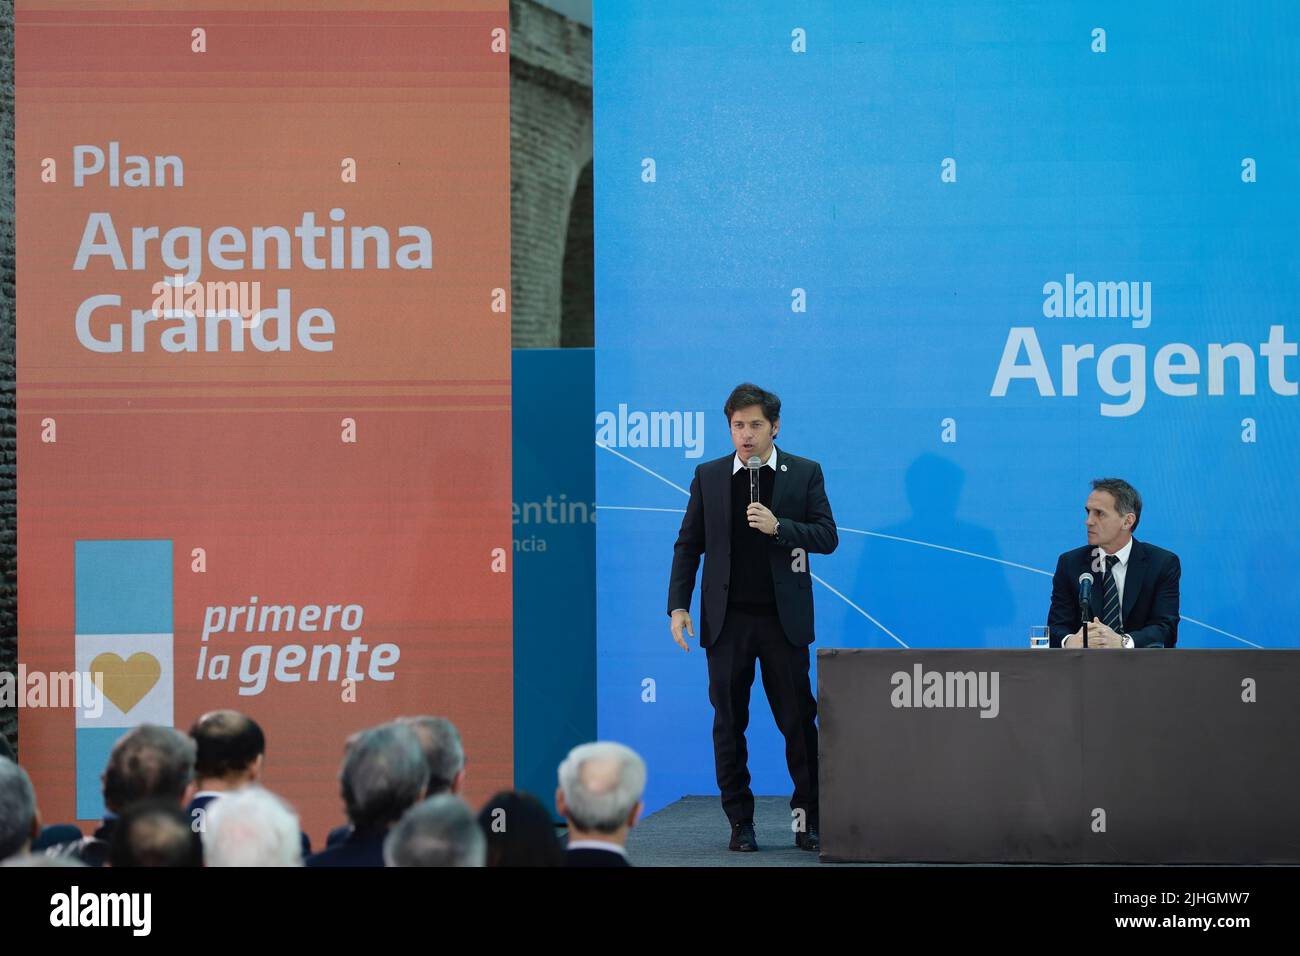 Buenos Aires, 18th July 2022. President Alberto Fernández led the presentation of Argentina Grande, Infrastructure Plan for the Development of the Nation, together with the Minister of Public Works, Gabriel Katopodis. The Governor of the Province of Buenos Aires Axel Kicillof giving a few words at the event.(Credit: Esteban Osorio/Alamy Live News) Stock Photo